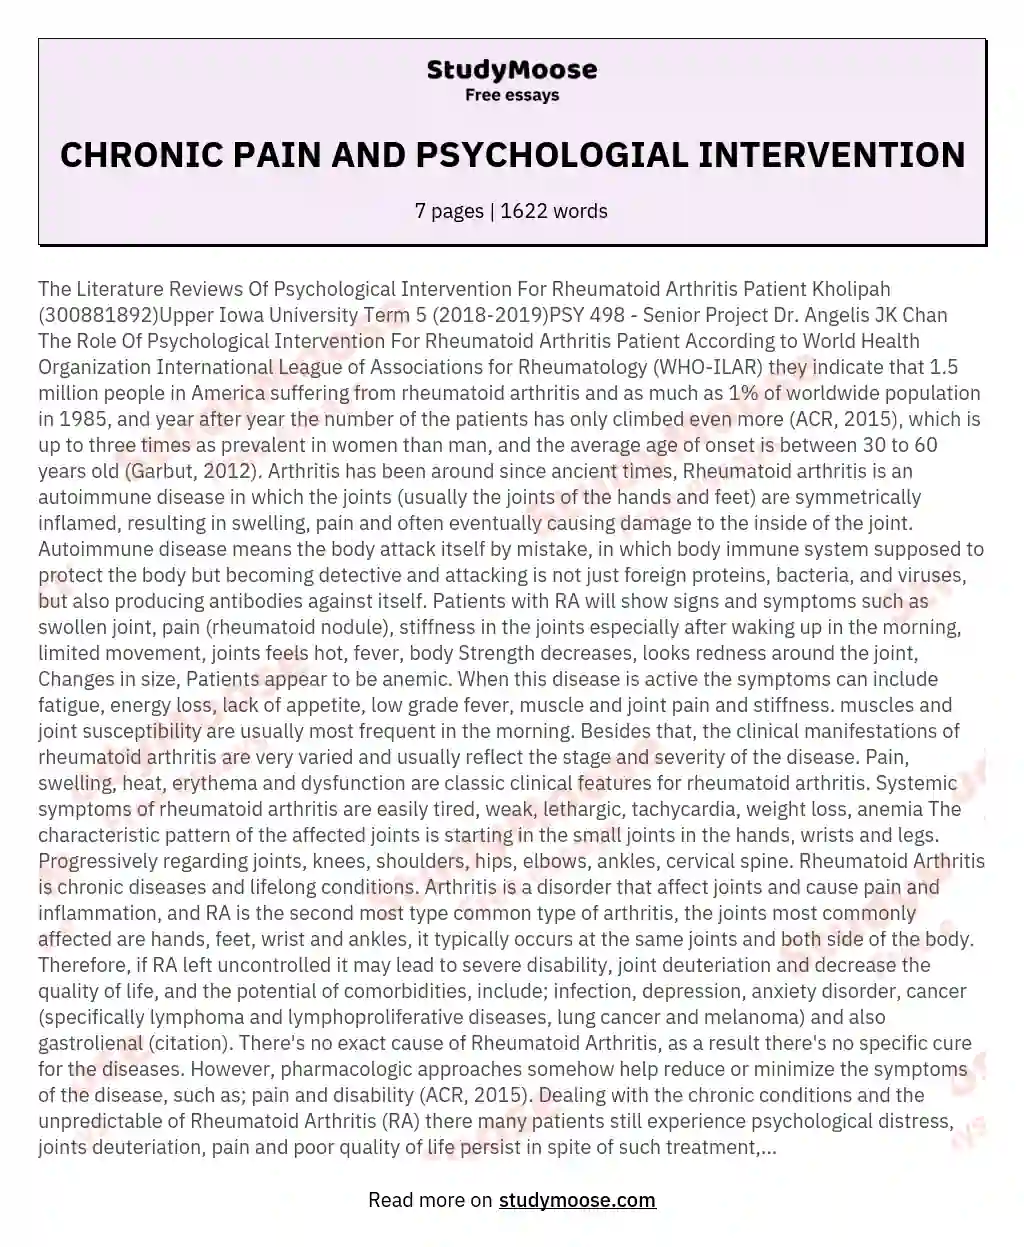 CHRONIC PAIN AND PSYCHOLOGIAL INTERVENTION